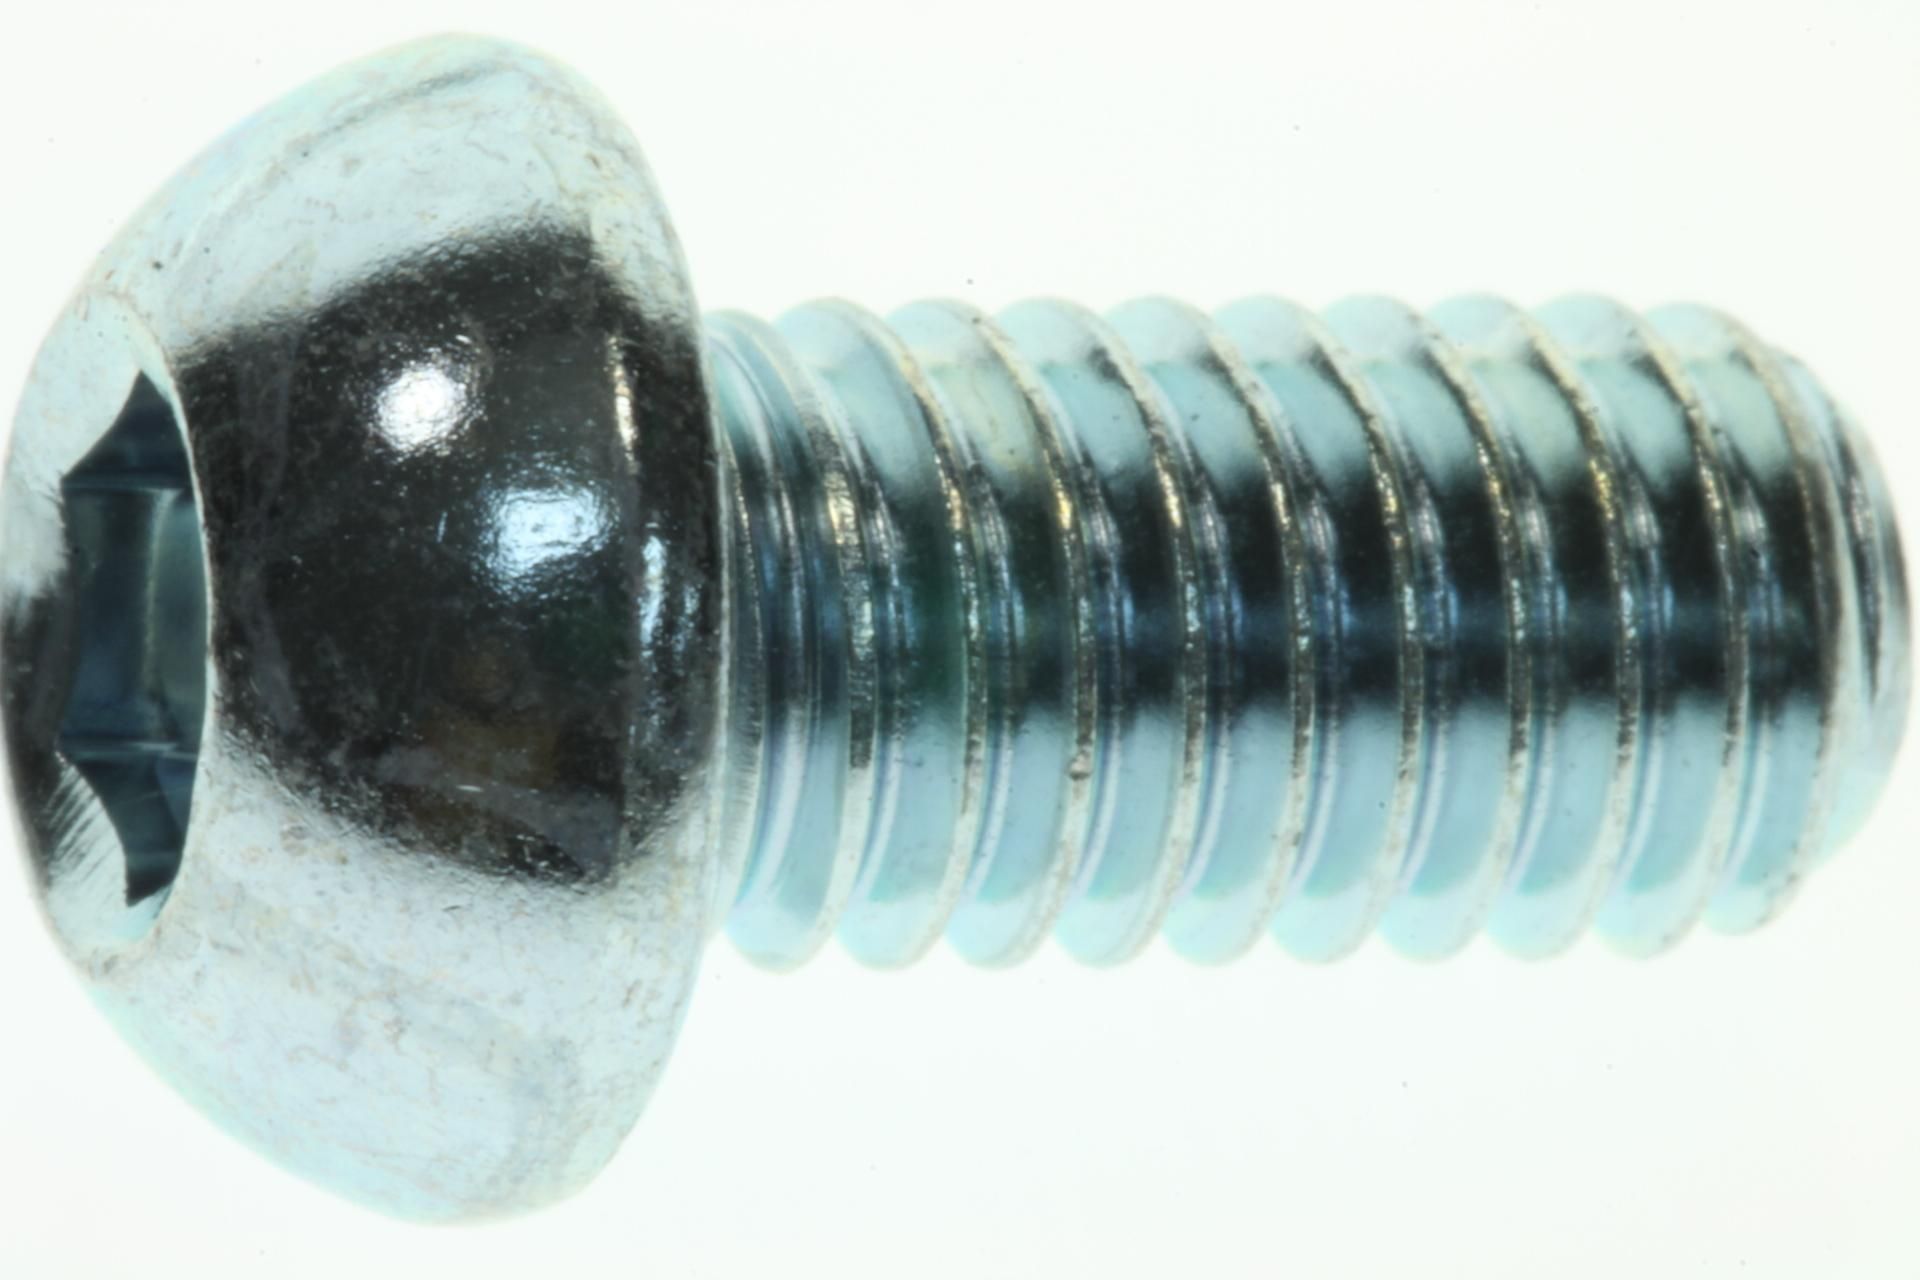 90111-06065-00 Superseded by 92012-06012-00 - BOLT, BUTTON HEAD